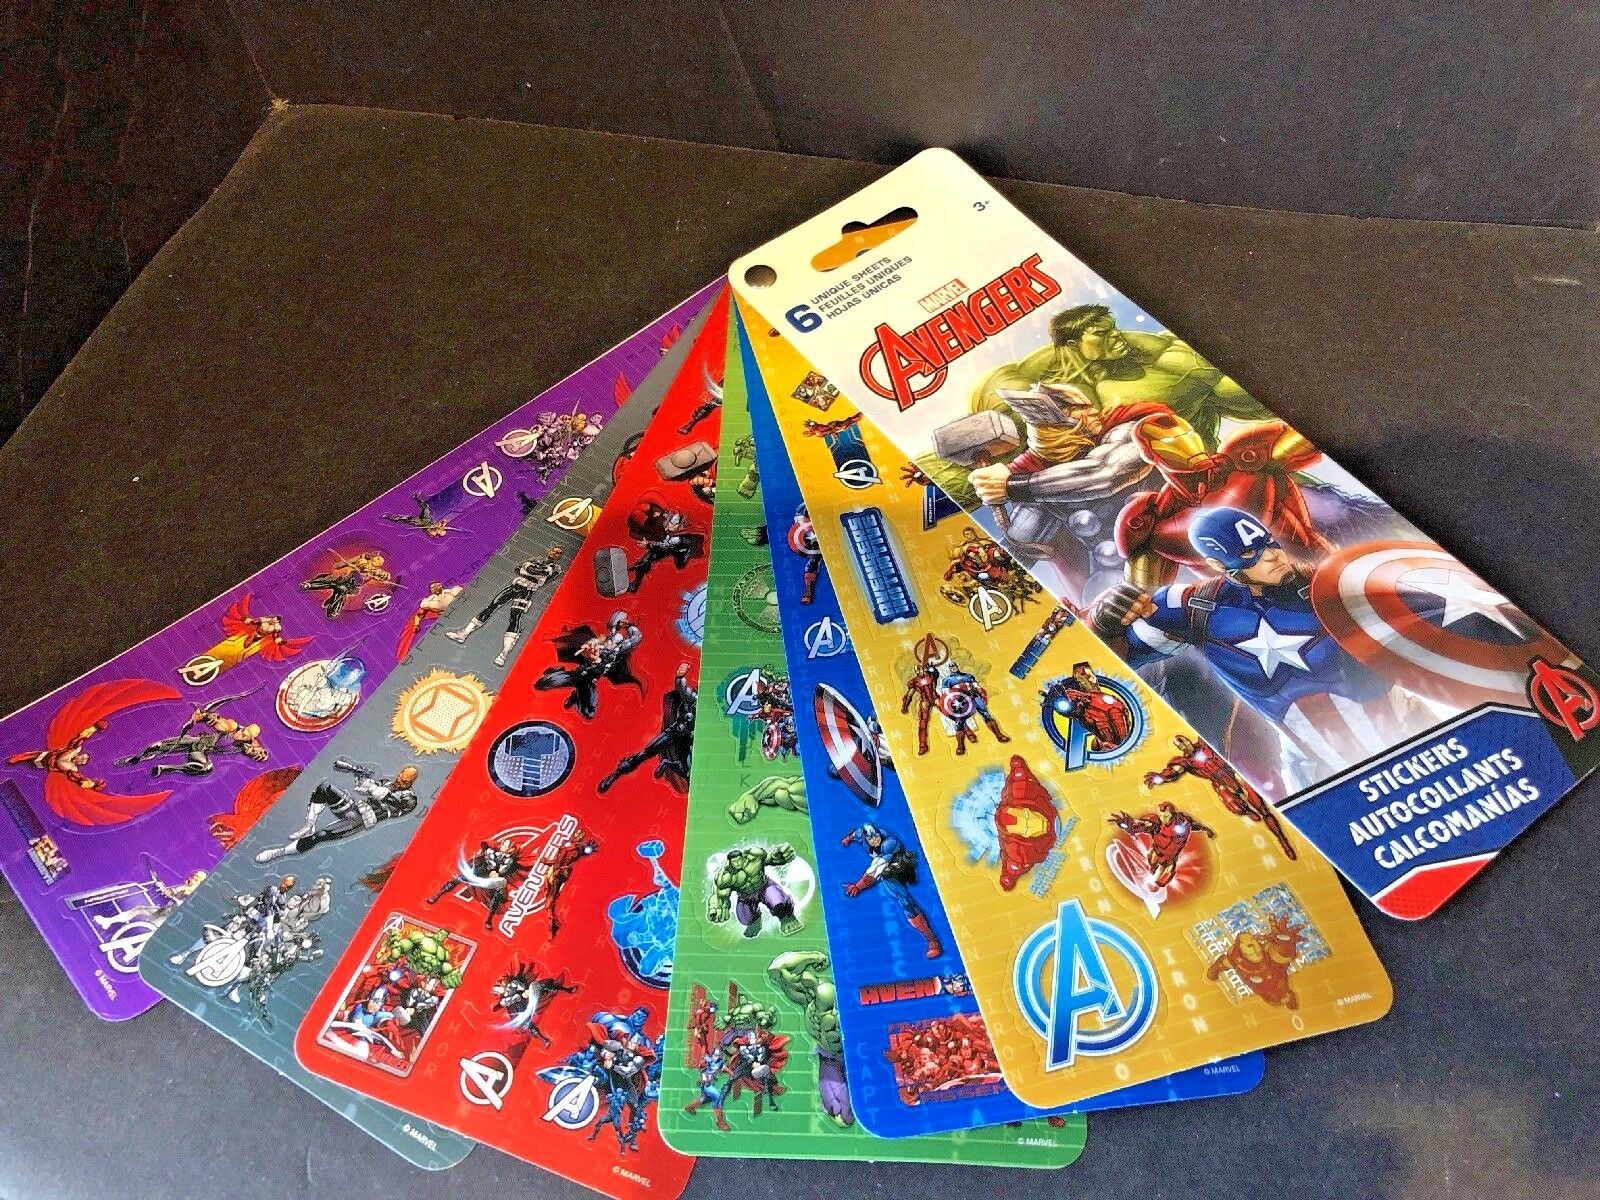 Avengers Authentic Licensed 12 Sheets of Stickers